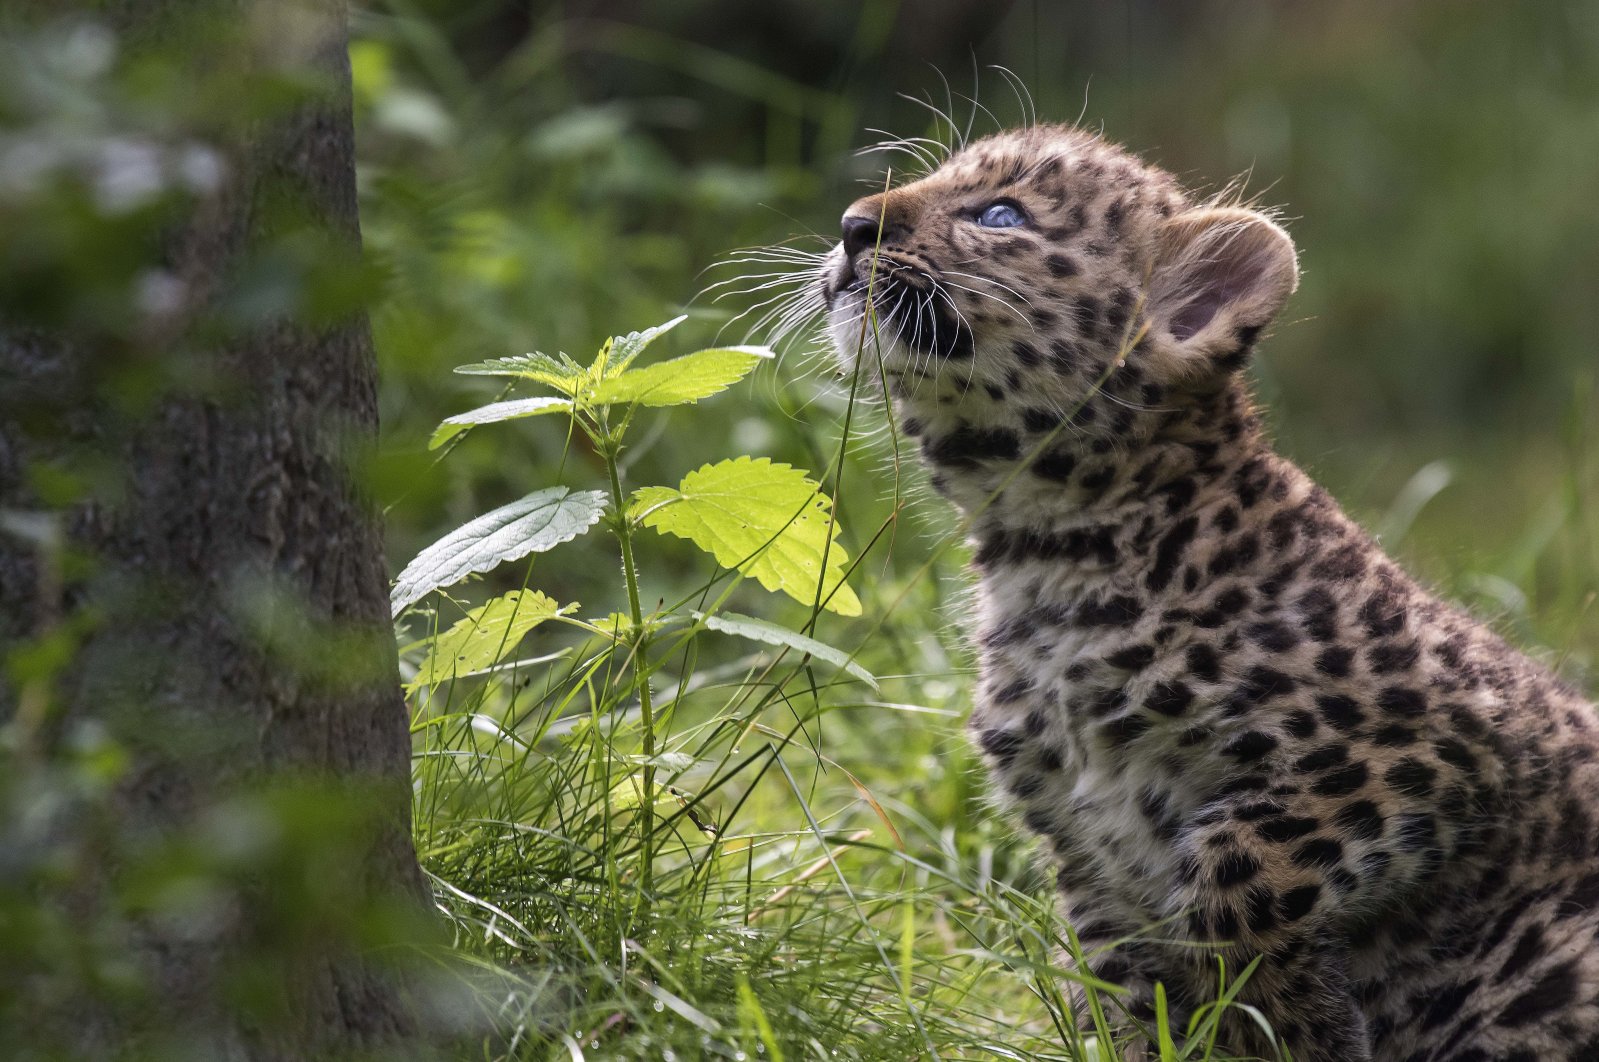 An Amur leopard cub, one of the many animal species at risk of extinction, in his enclosure in a zoo in Leipzig, Germany, June 27, 2017. (AP Photo)